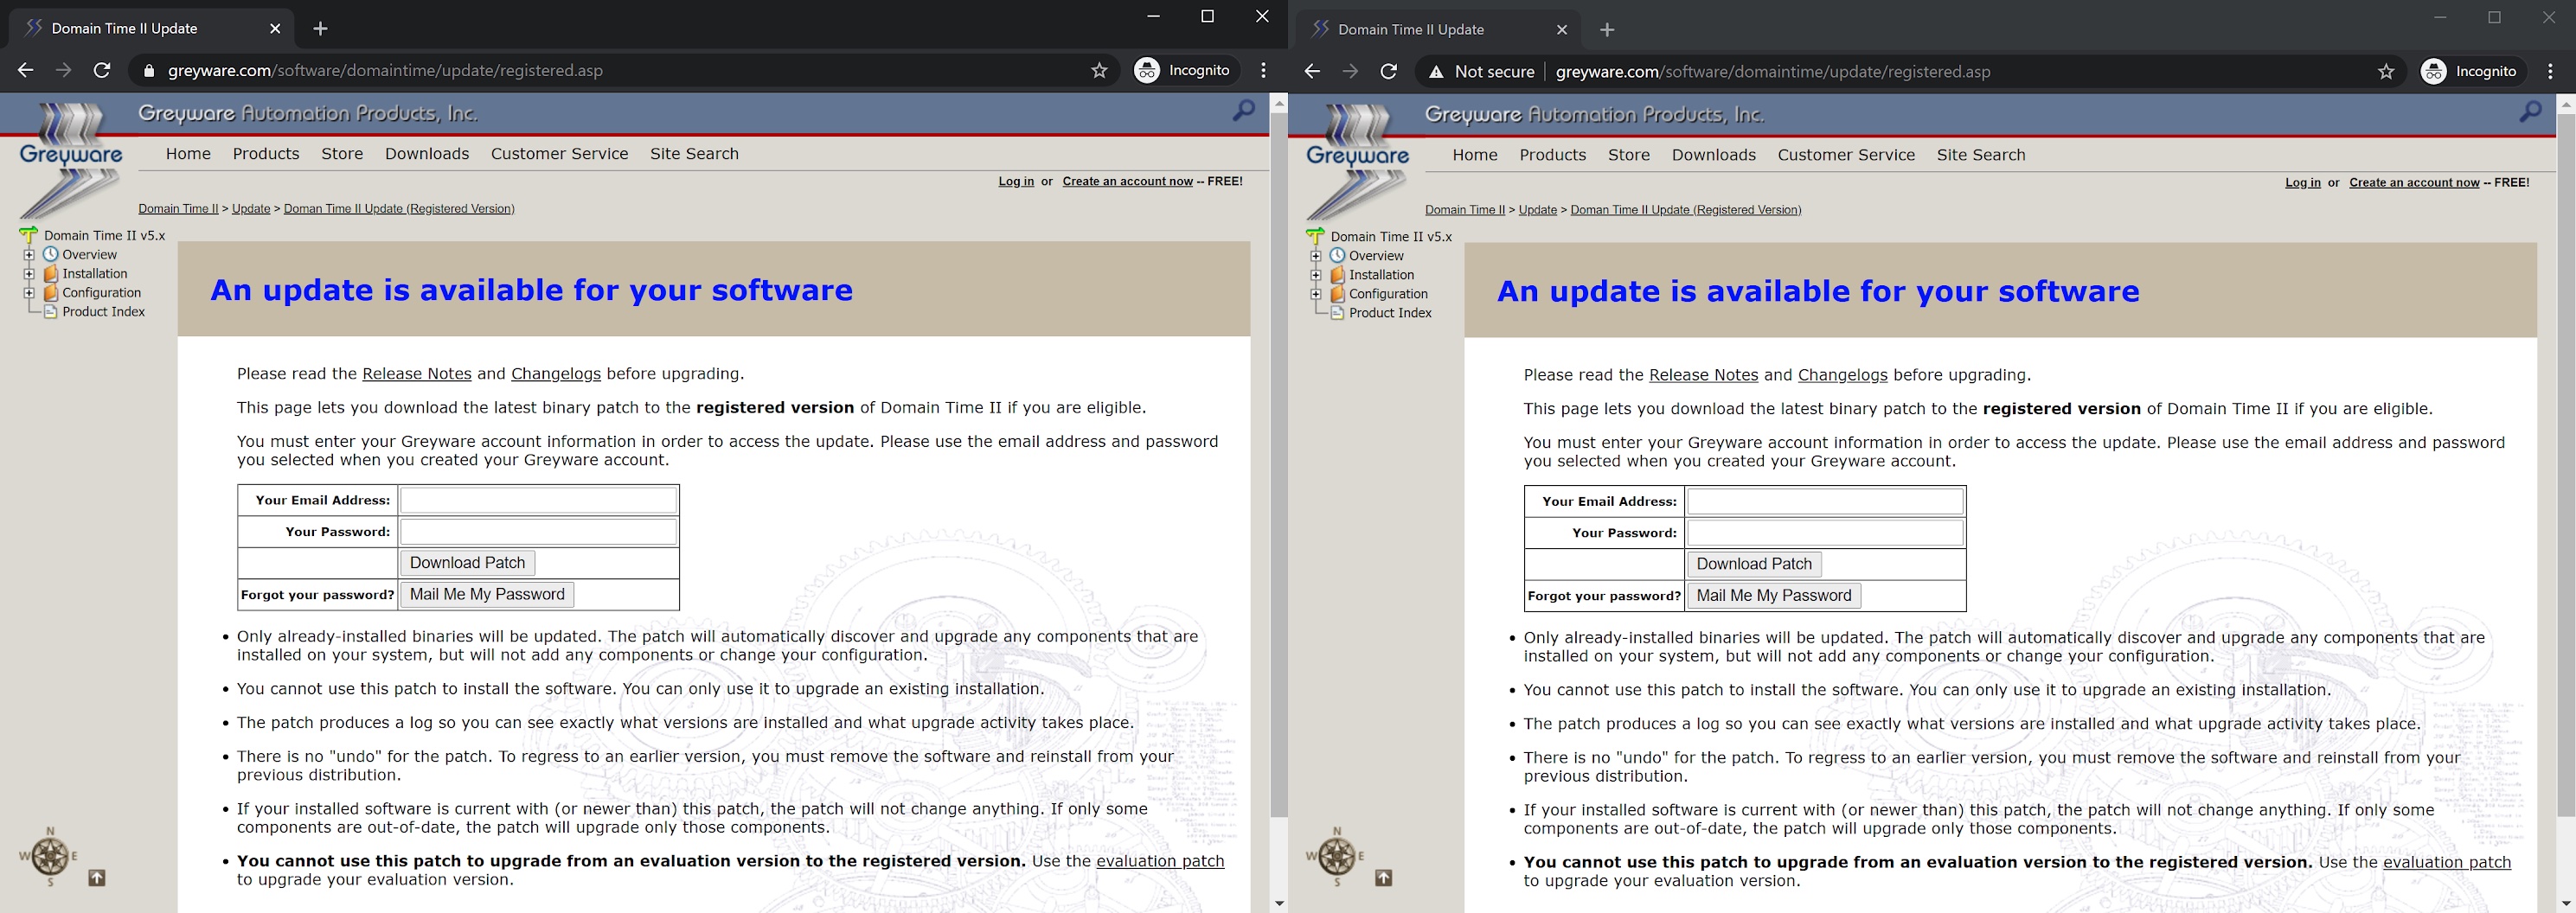 Greyware’s official update website (left) and the demonstration attack website (right)